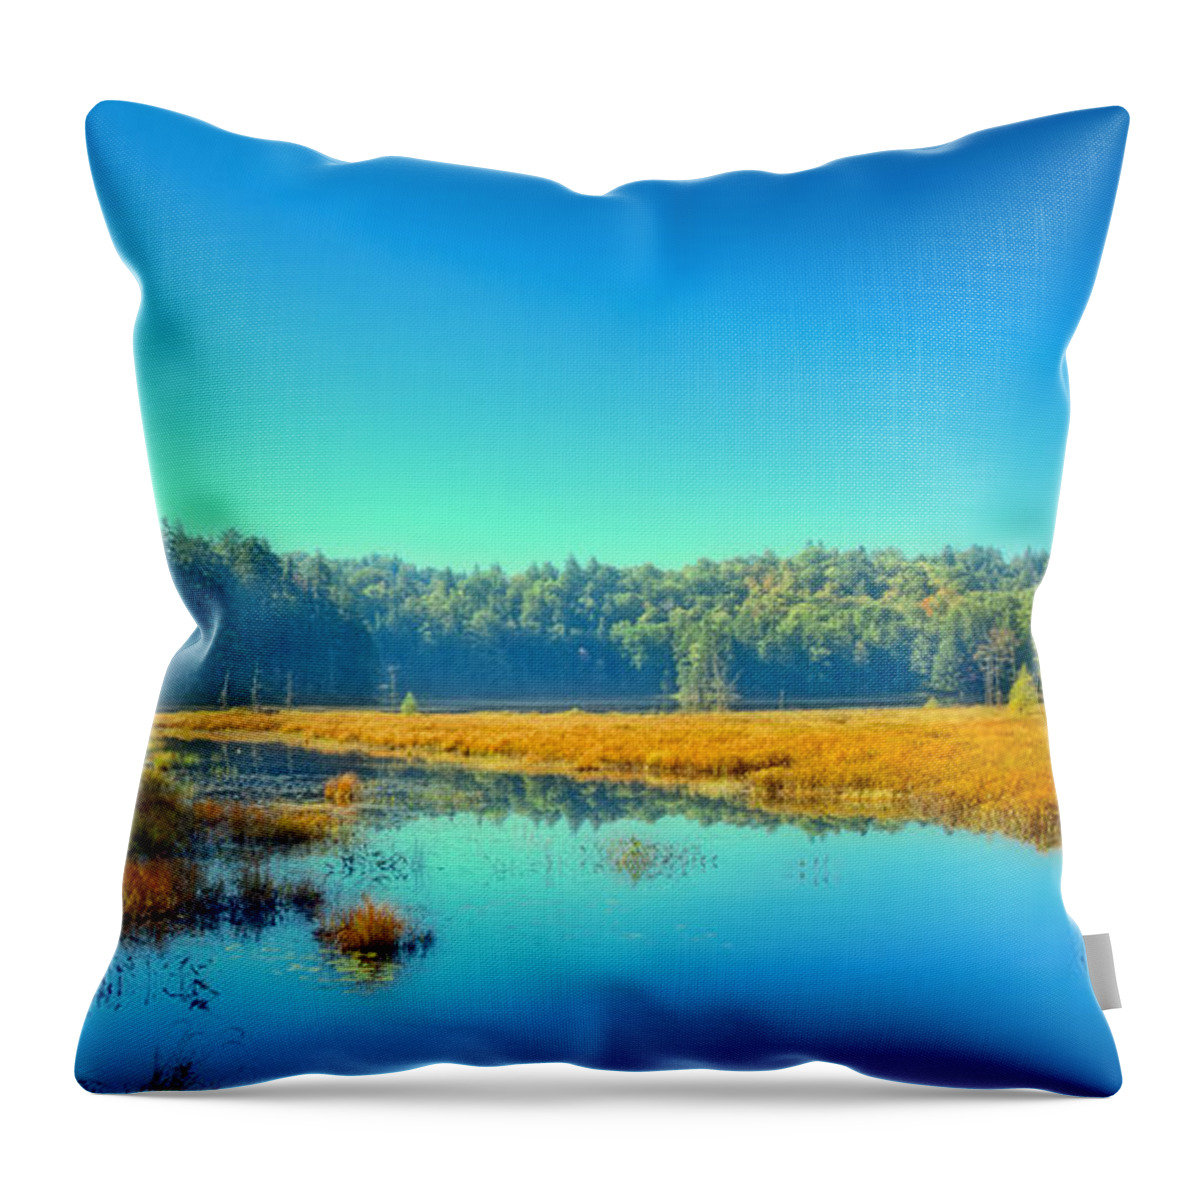 An Autumn Morning At Cary Lake Throw Pillow featuring the photograph An Autumn Morning at Cary Lake by David Patterson